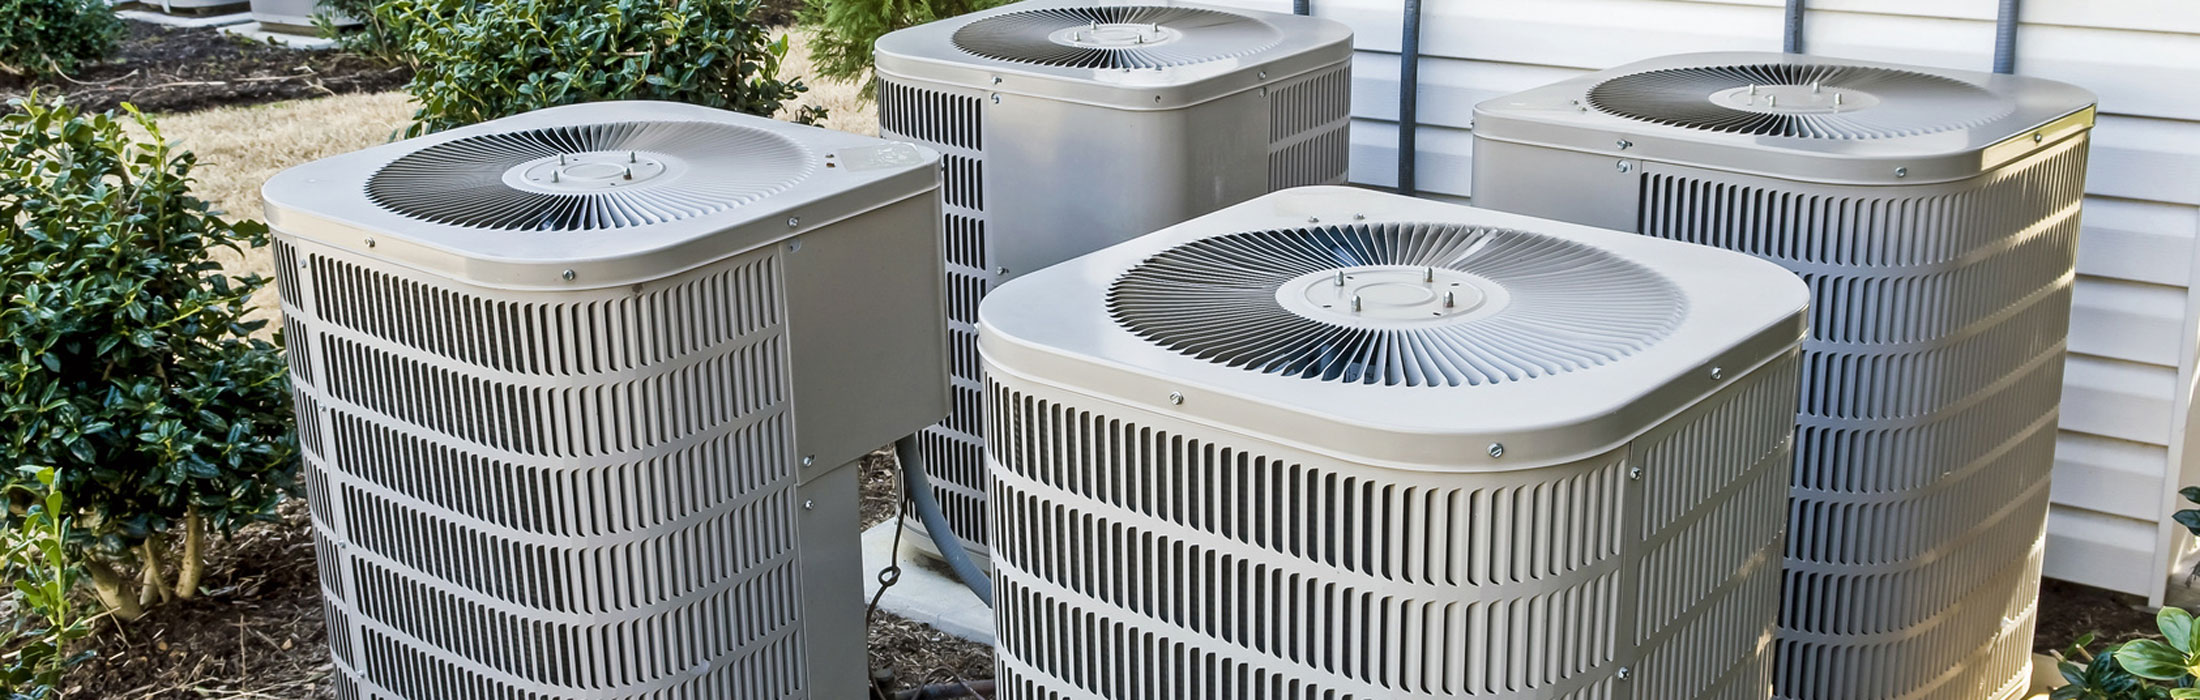 Air Conditioner Cooling HVAC Residential Unit